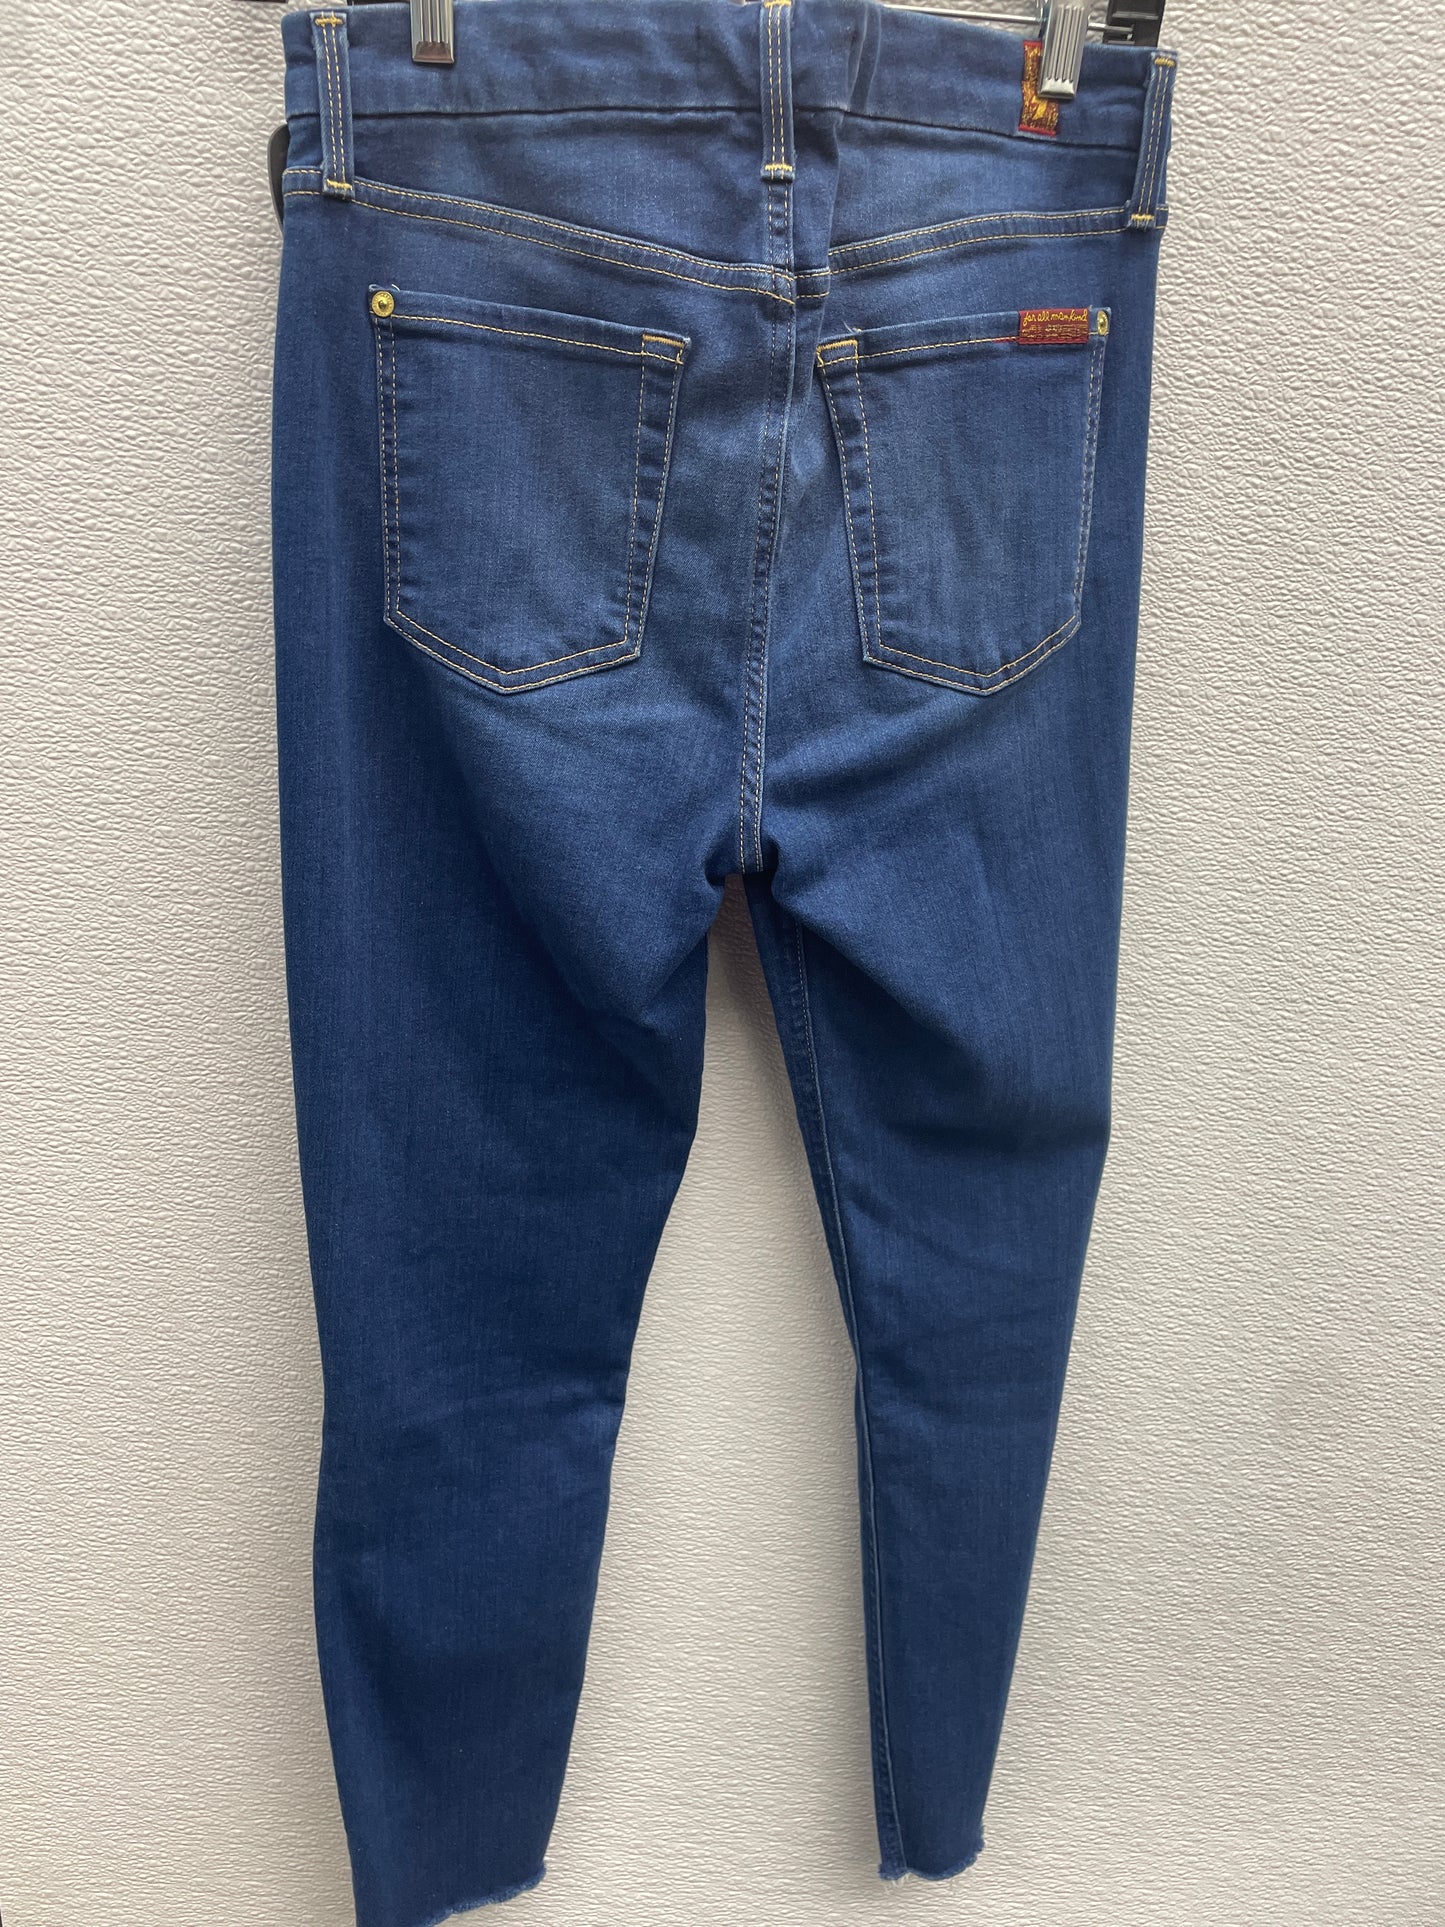 Jeans Skinny By 7 For All Mankind  Size: 6